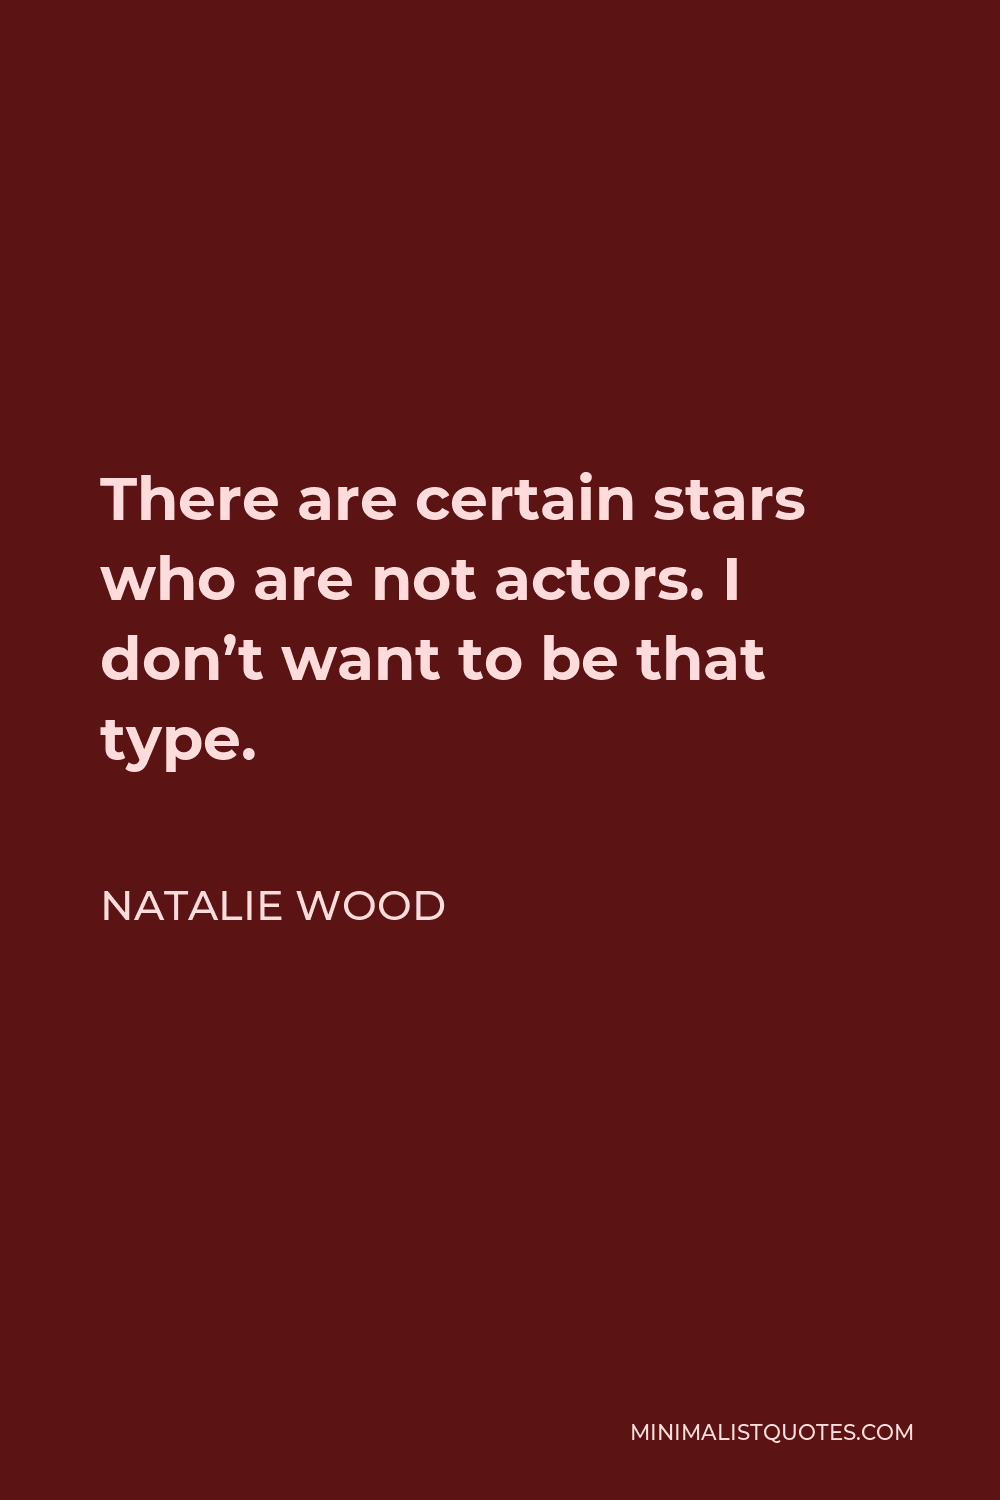 Natalie Wood Quote - There are certain stars who are not actors. I don’t want to be that type.